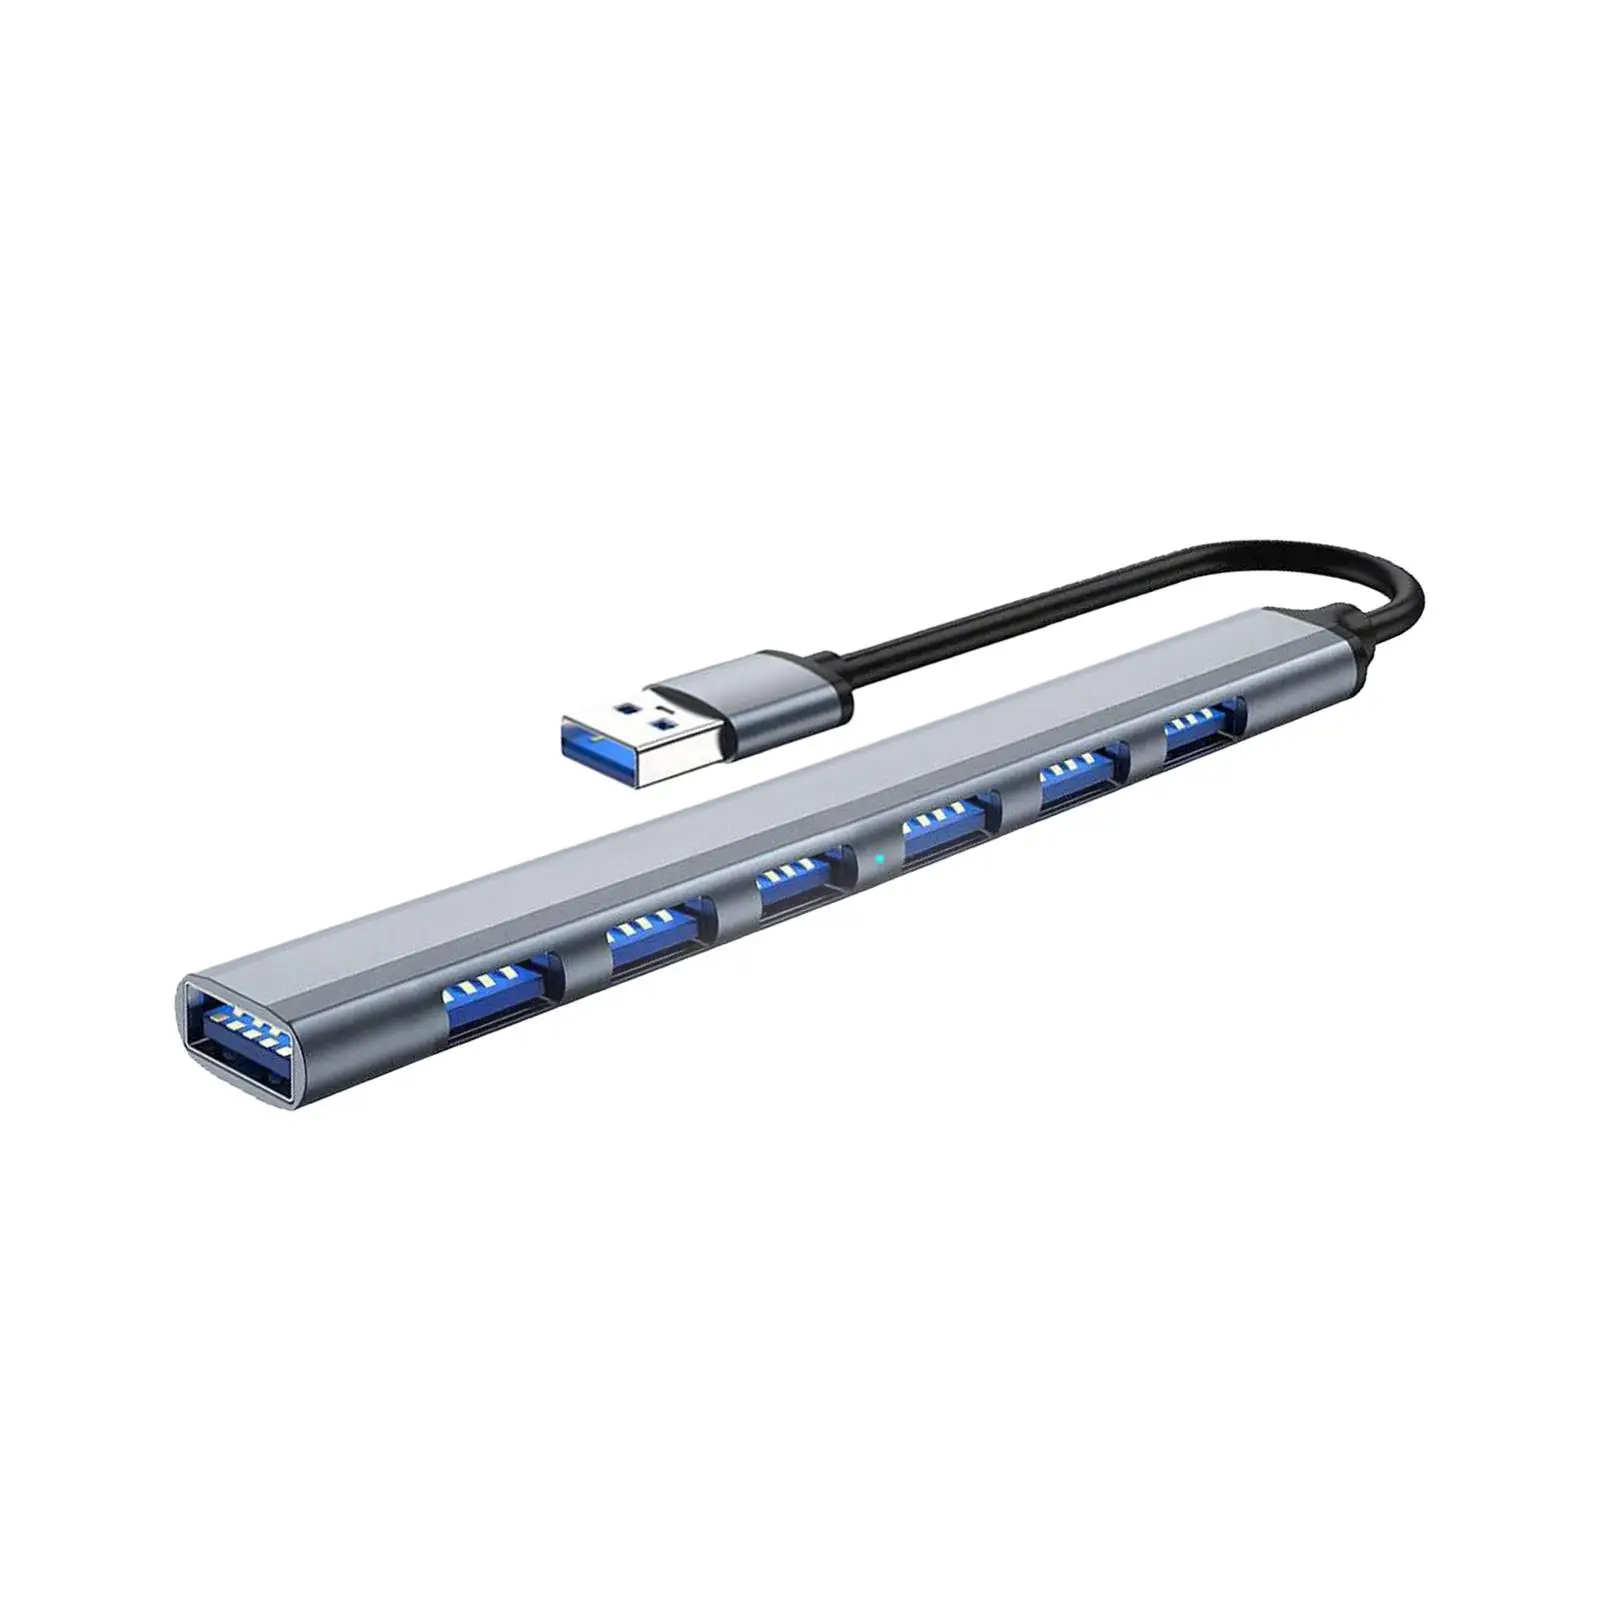 7 in 1 USB Hub TF Card Reader Easy to Use Audio Output Aluminum Alloy 7 USB Ports Plug and Play USB Docking Station